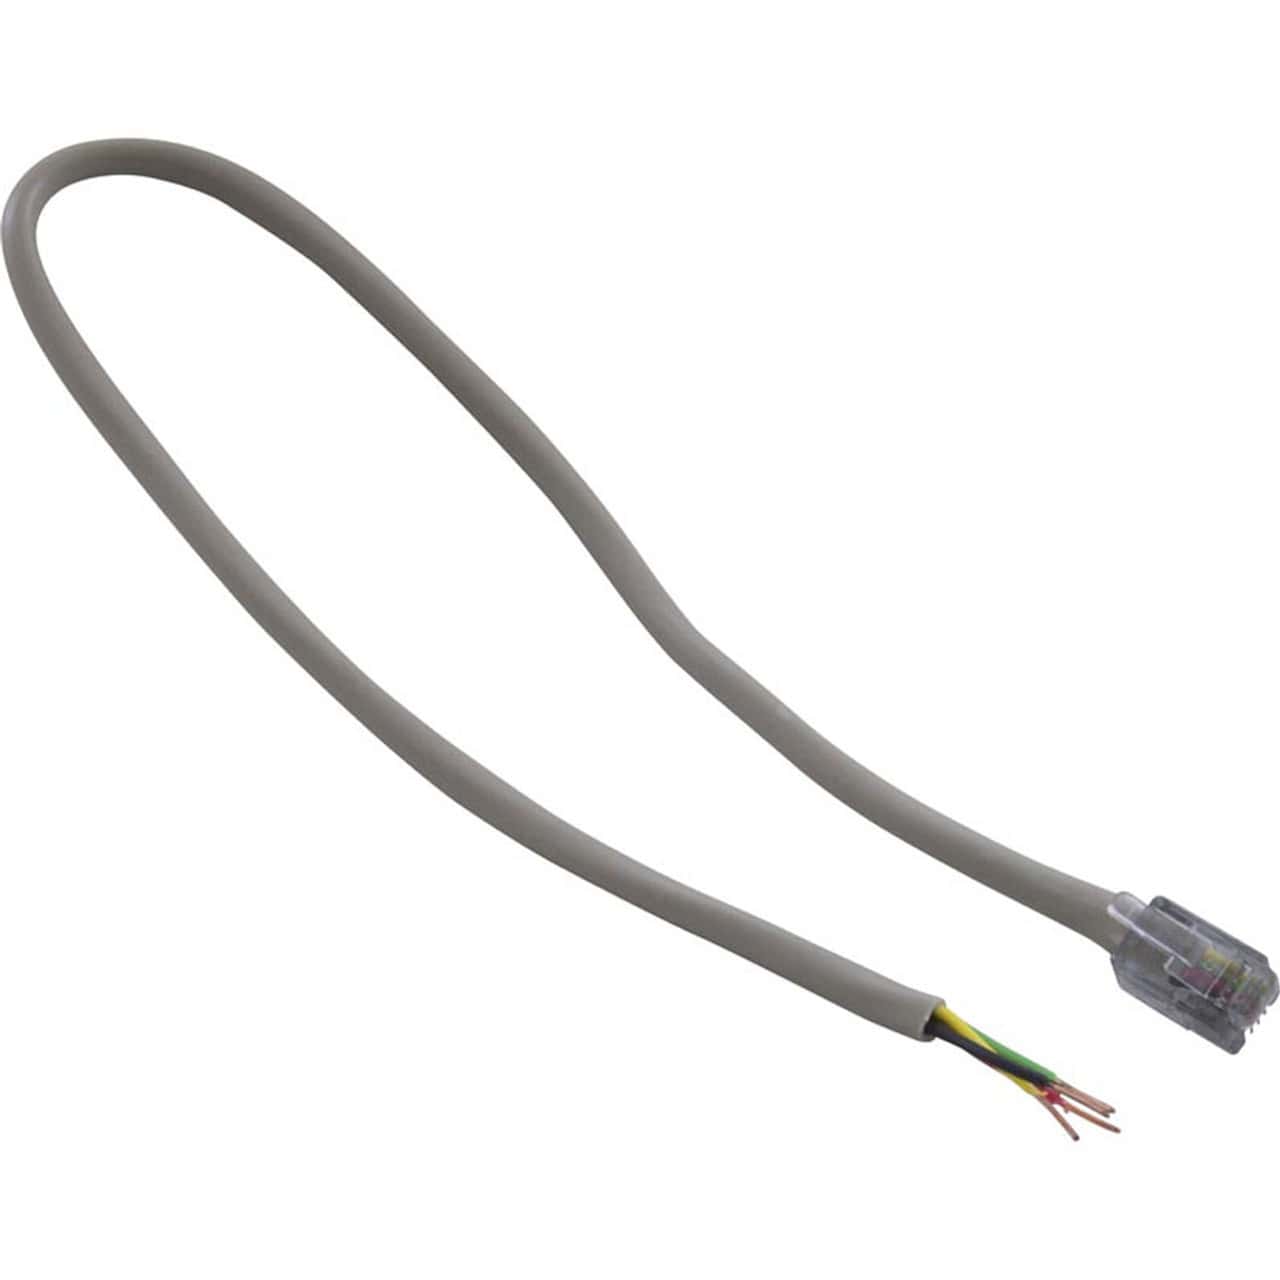 Zodiac Systems | Jandy Pro Series, Jandy AquaLink RS Wire Harness w/ RJ10 Connector - R0467100